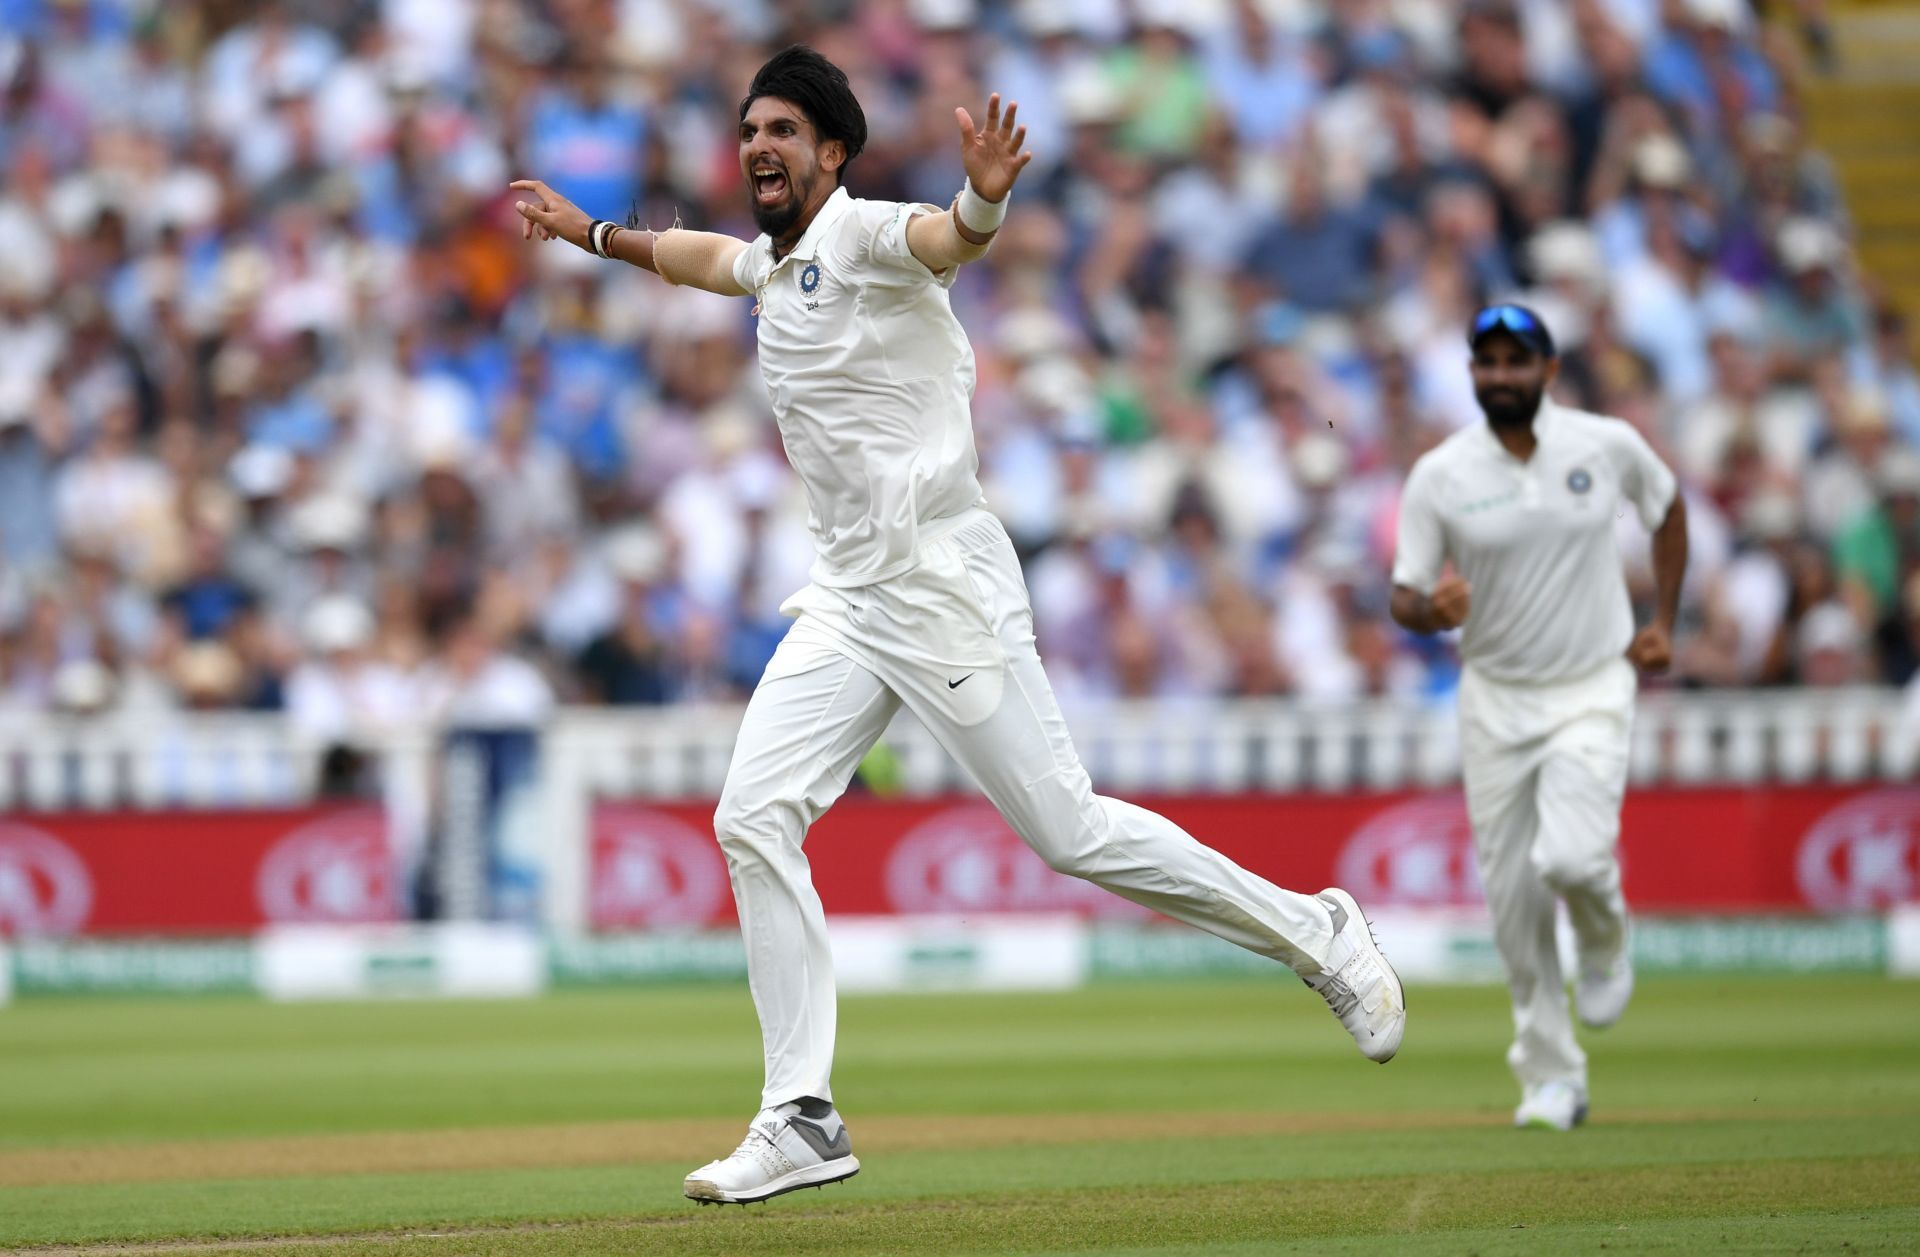 Ishant Sharma celebrates after dismissing Ben Stokes during the 2018 Edgbaston Test. Pic: Getty Images